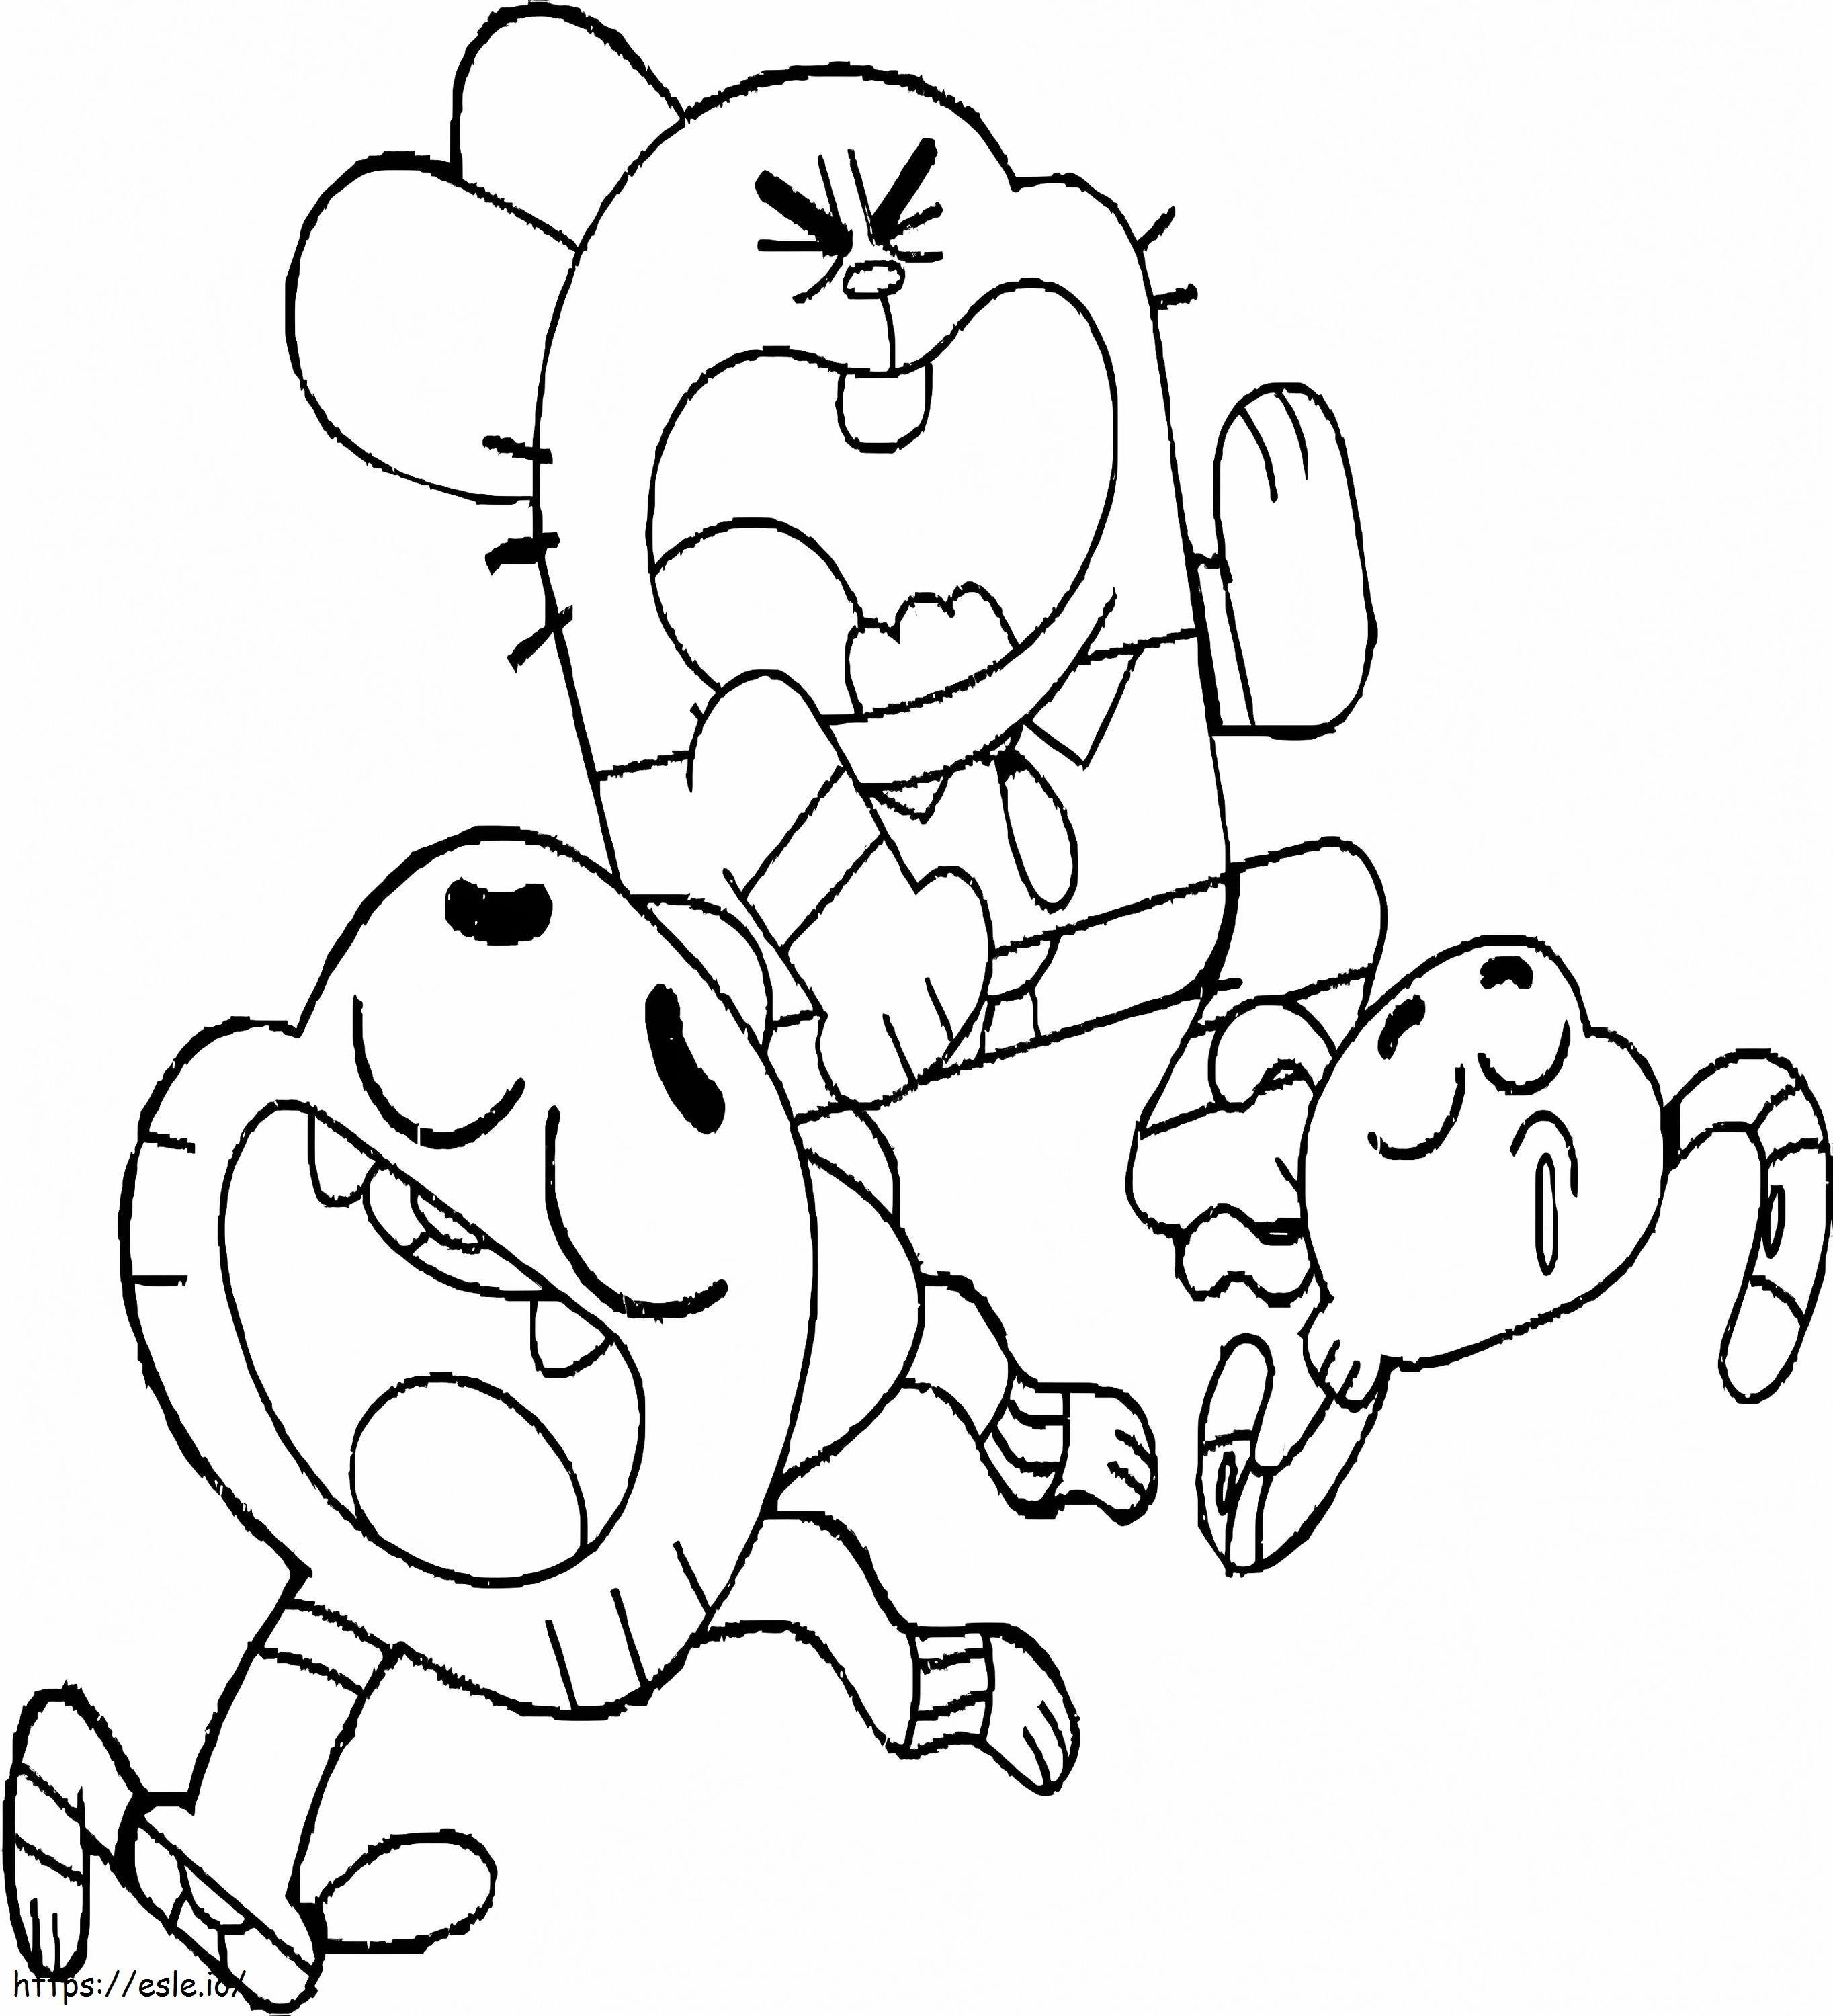 Two Brothers Gumball Darwin And Dad coloring page